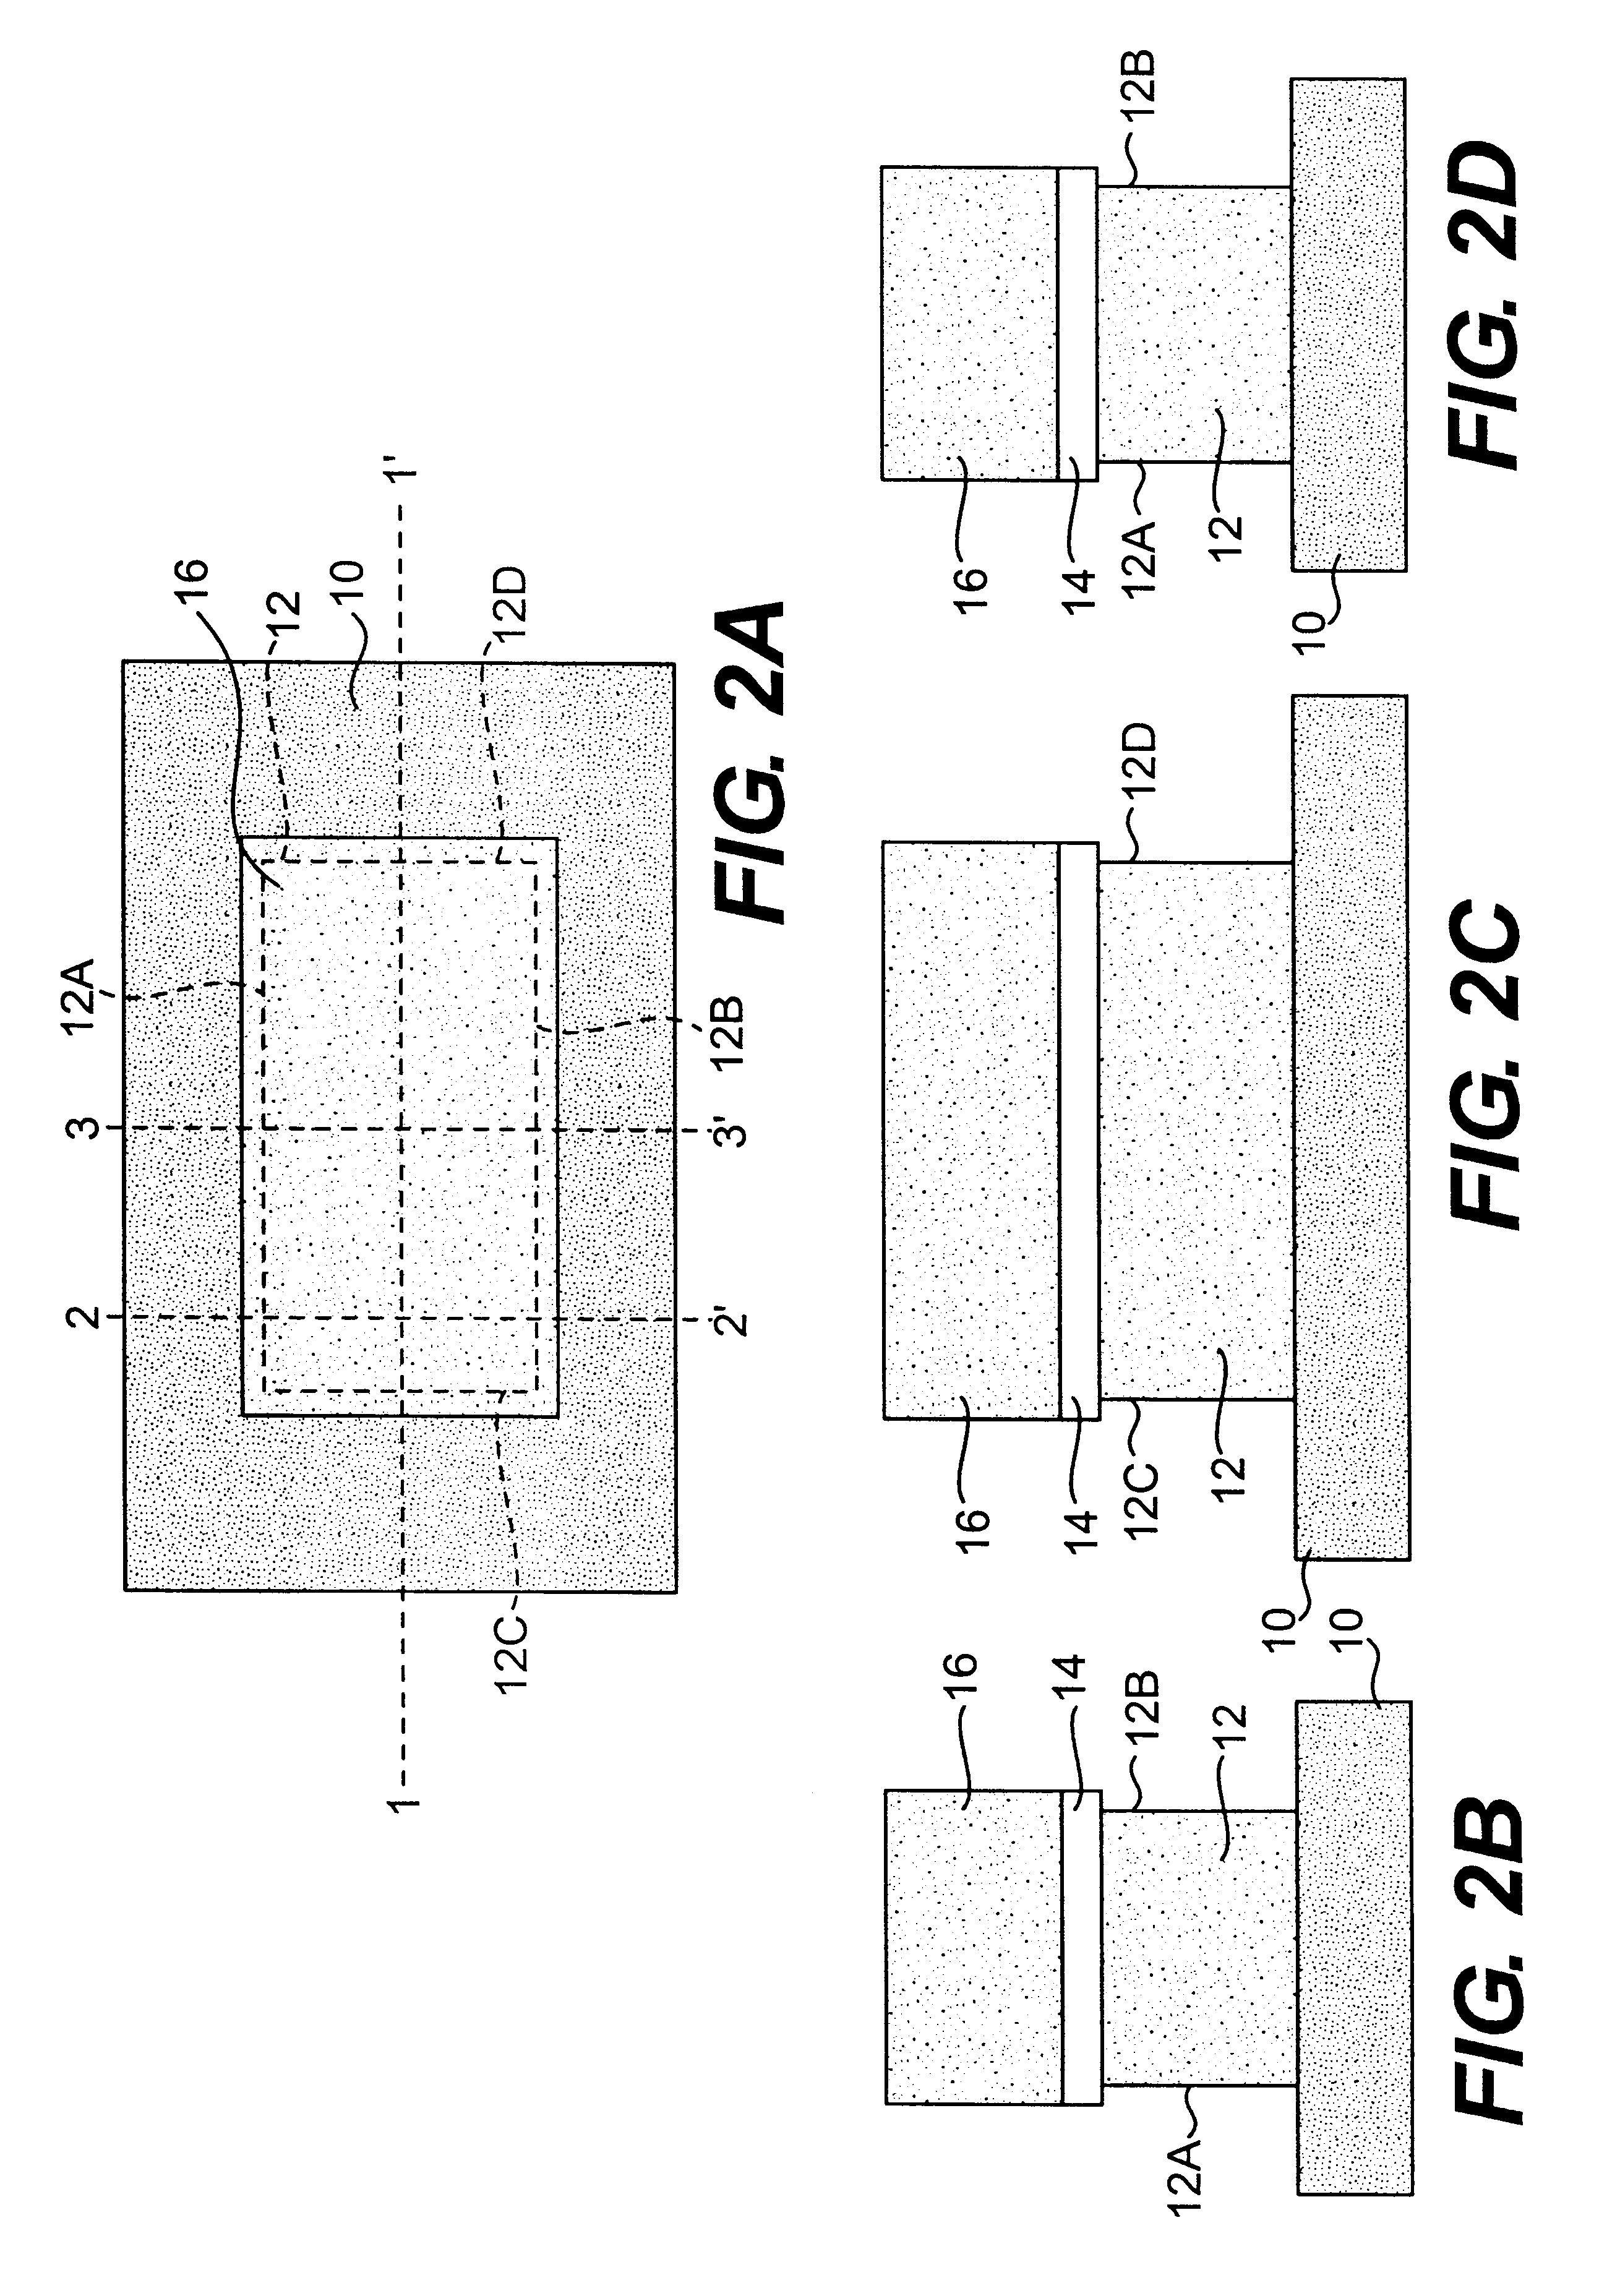 Method for wrapped-gate MOSFET